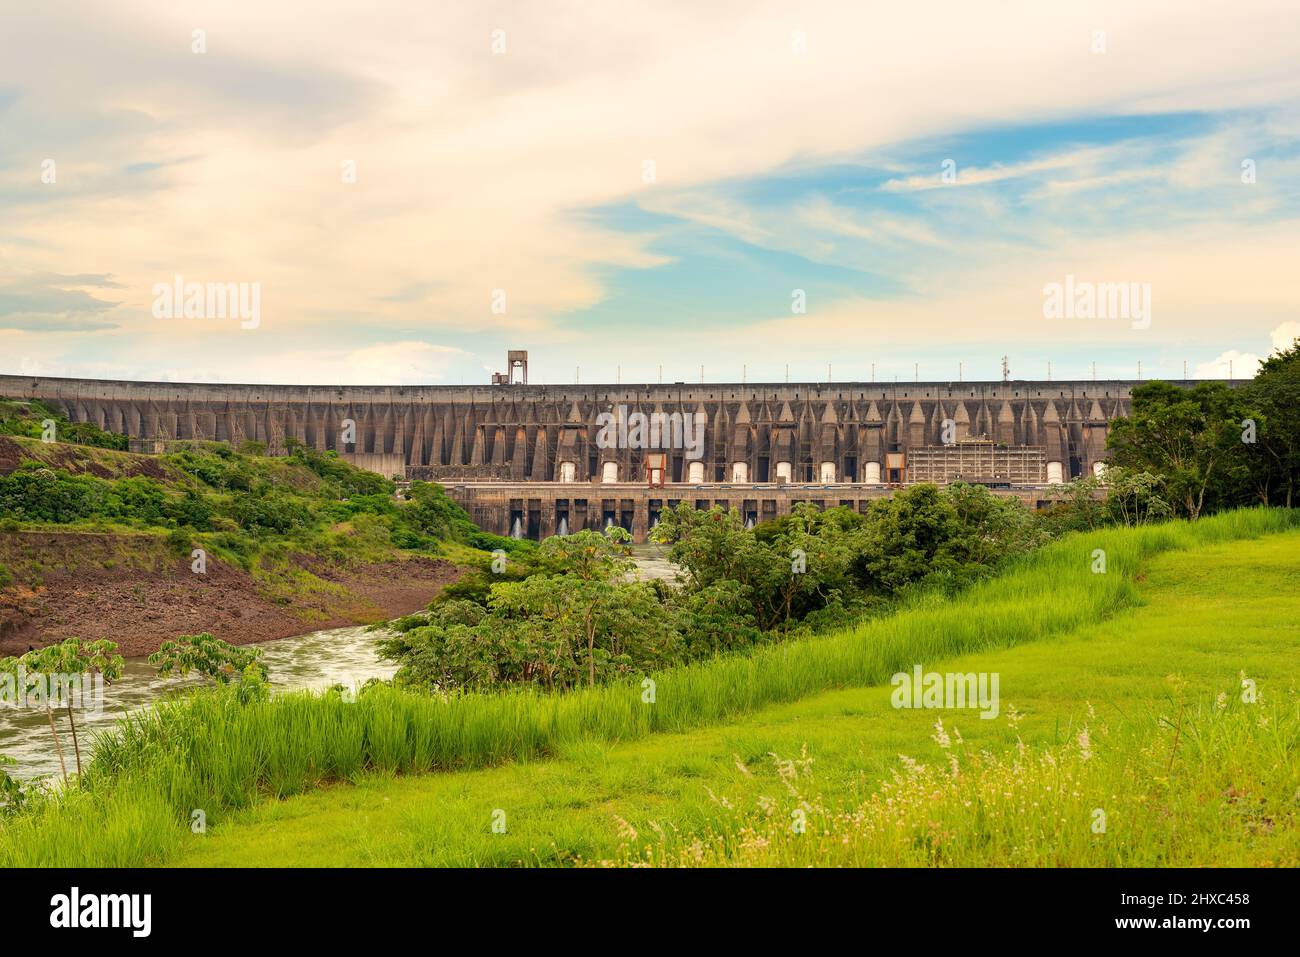 Itaipu Hydroelectric Dam on the Parana River. Stock Photo